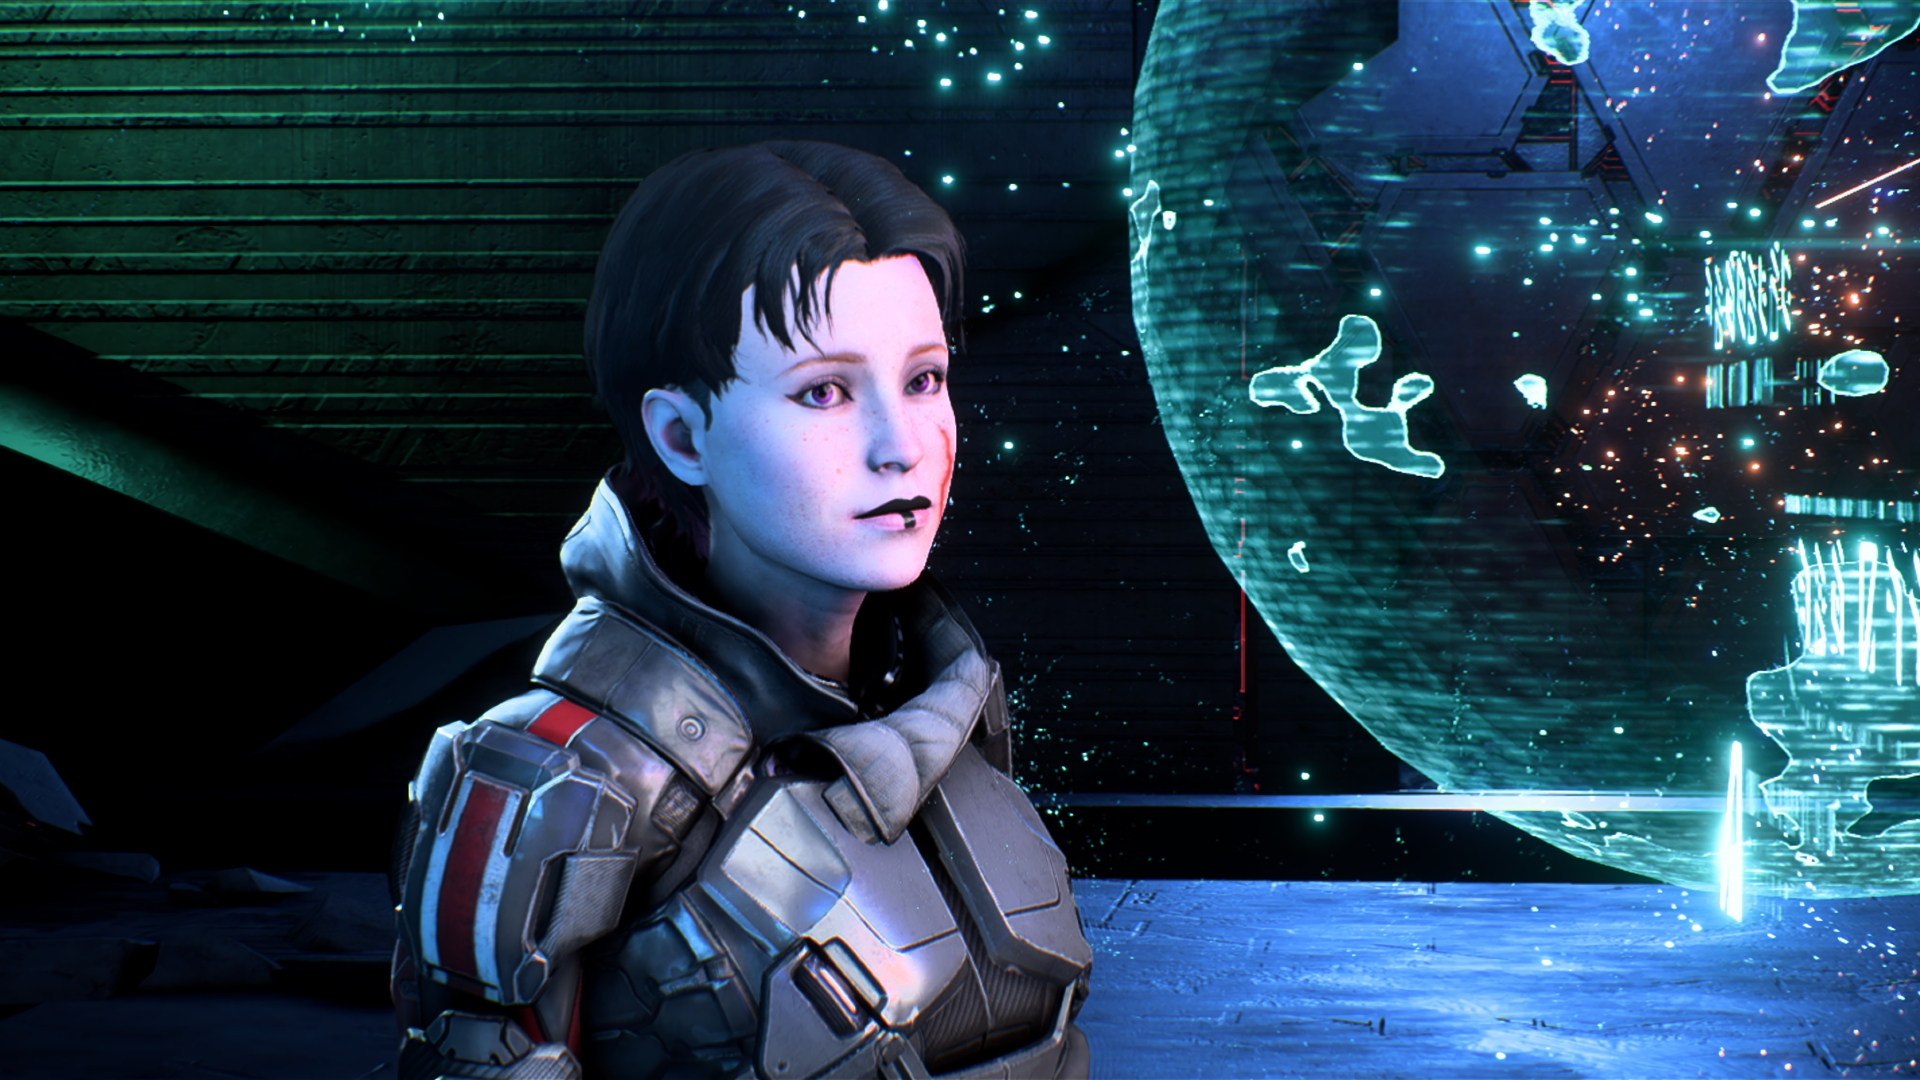 General 1920x1080 Mass Effect: Andromeda science fiction video games video game characters Bioware Electronic Arts